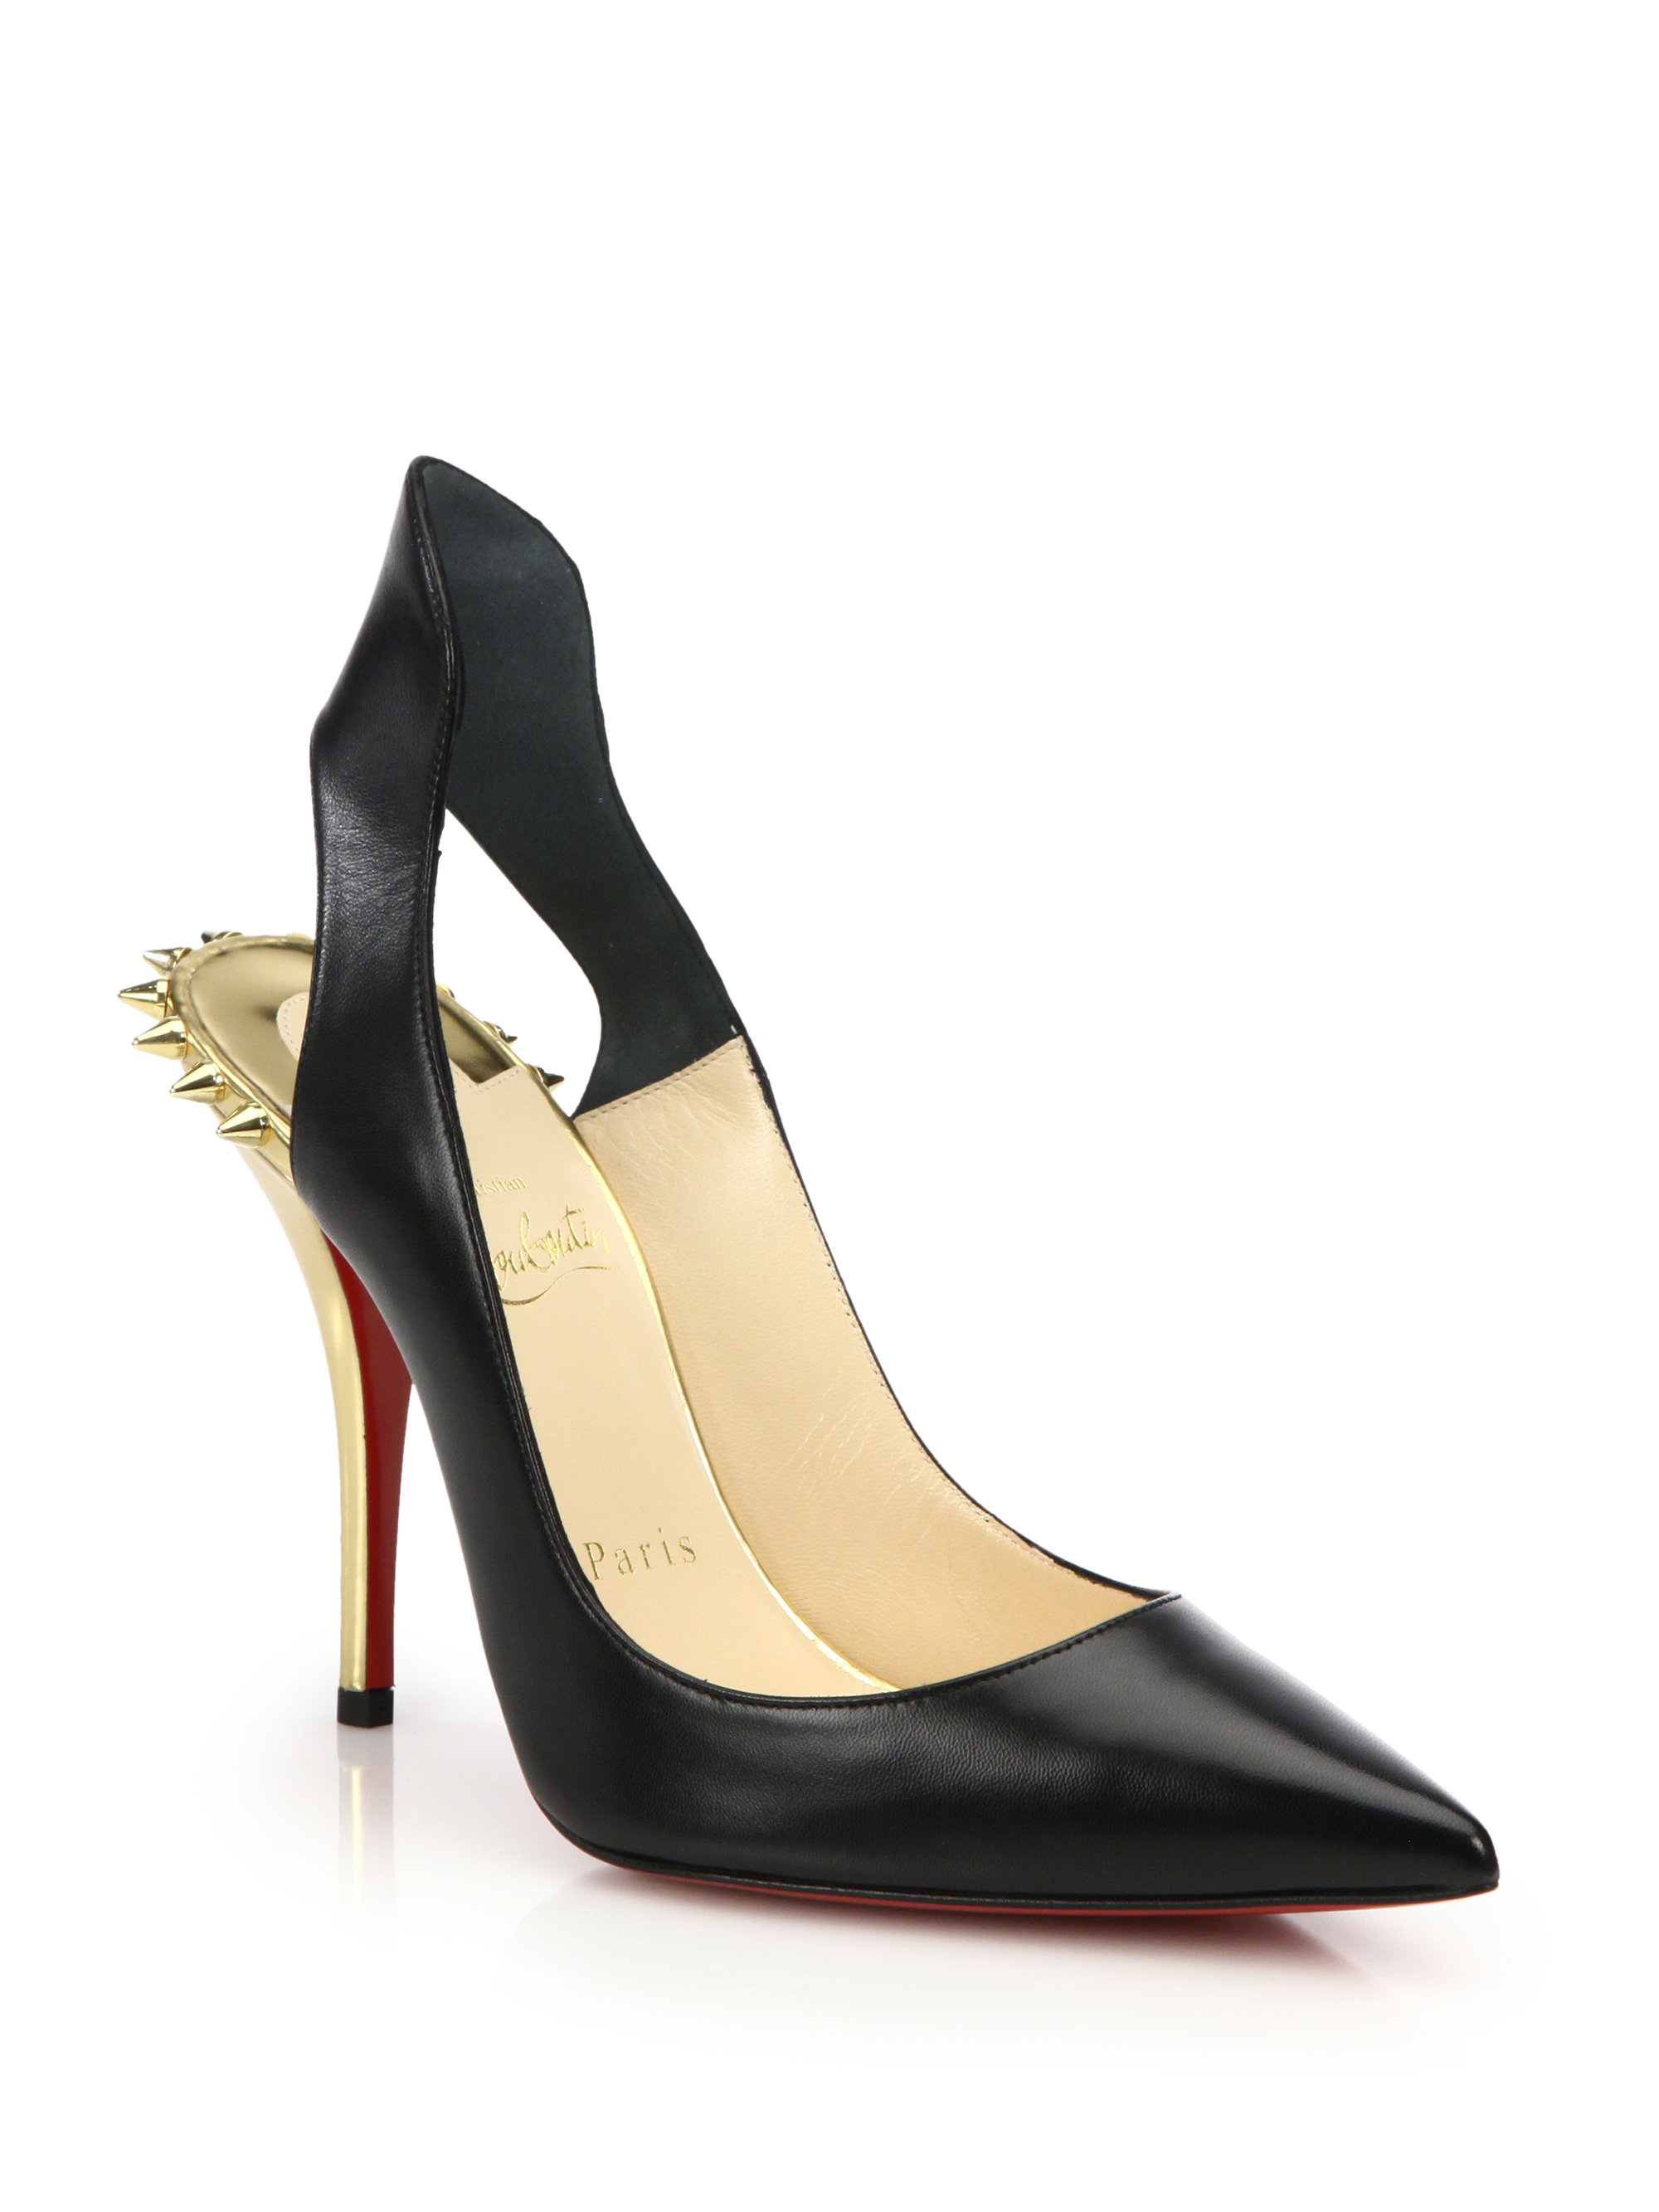 louboutin replica boots - Christian louboutin Survivita Spiked Leather Slingback Pumps in ...